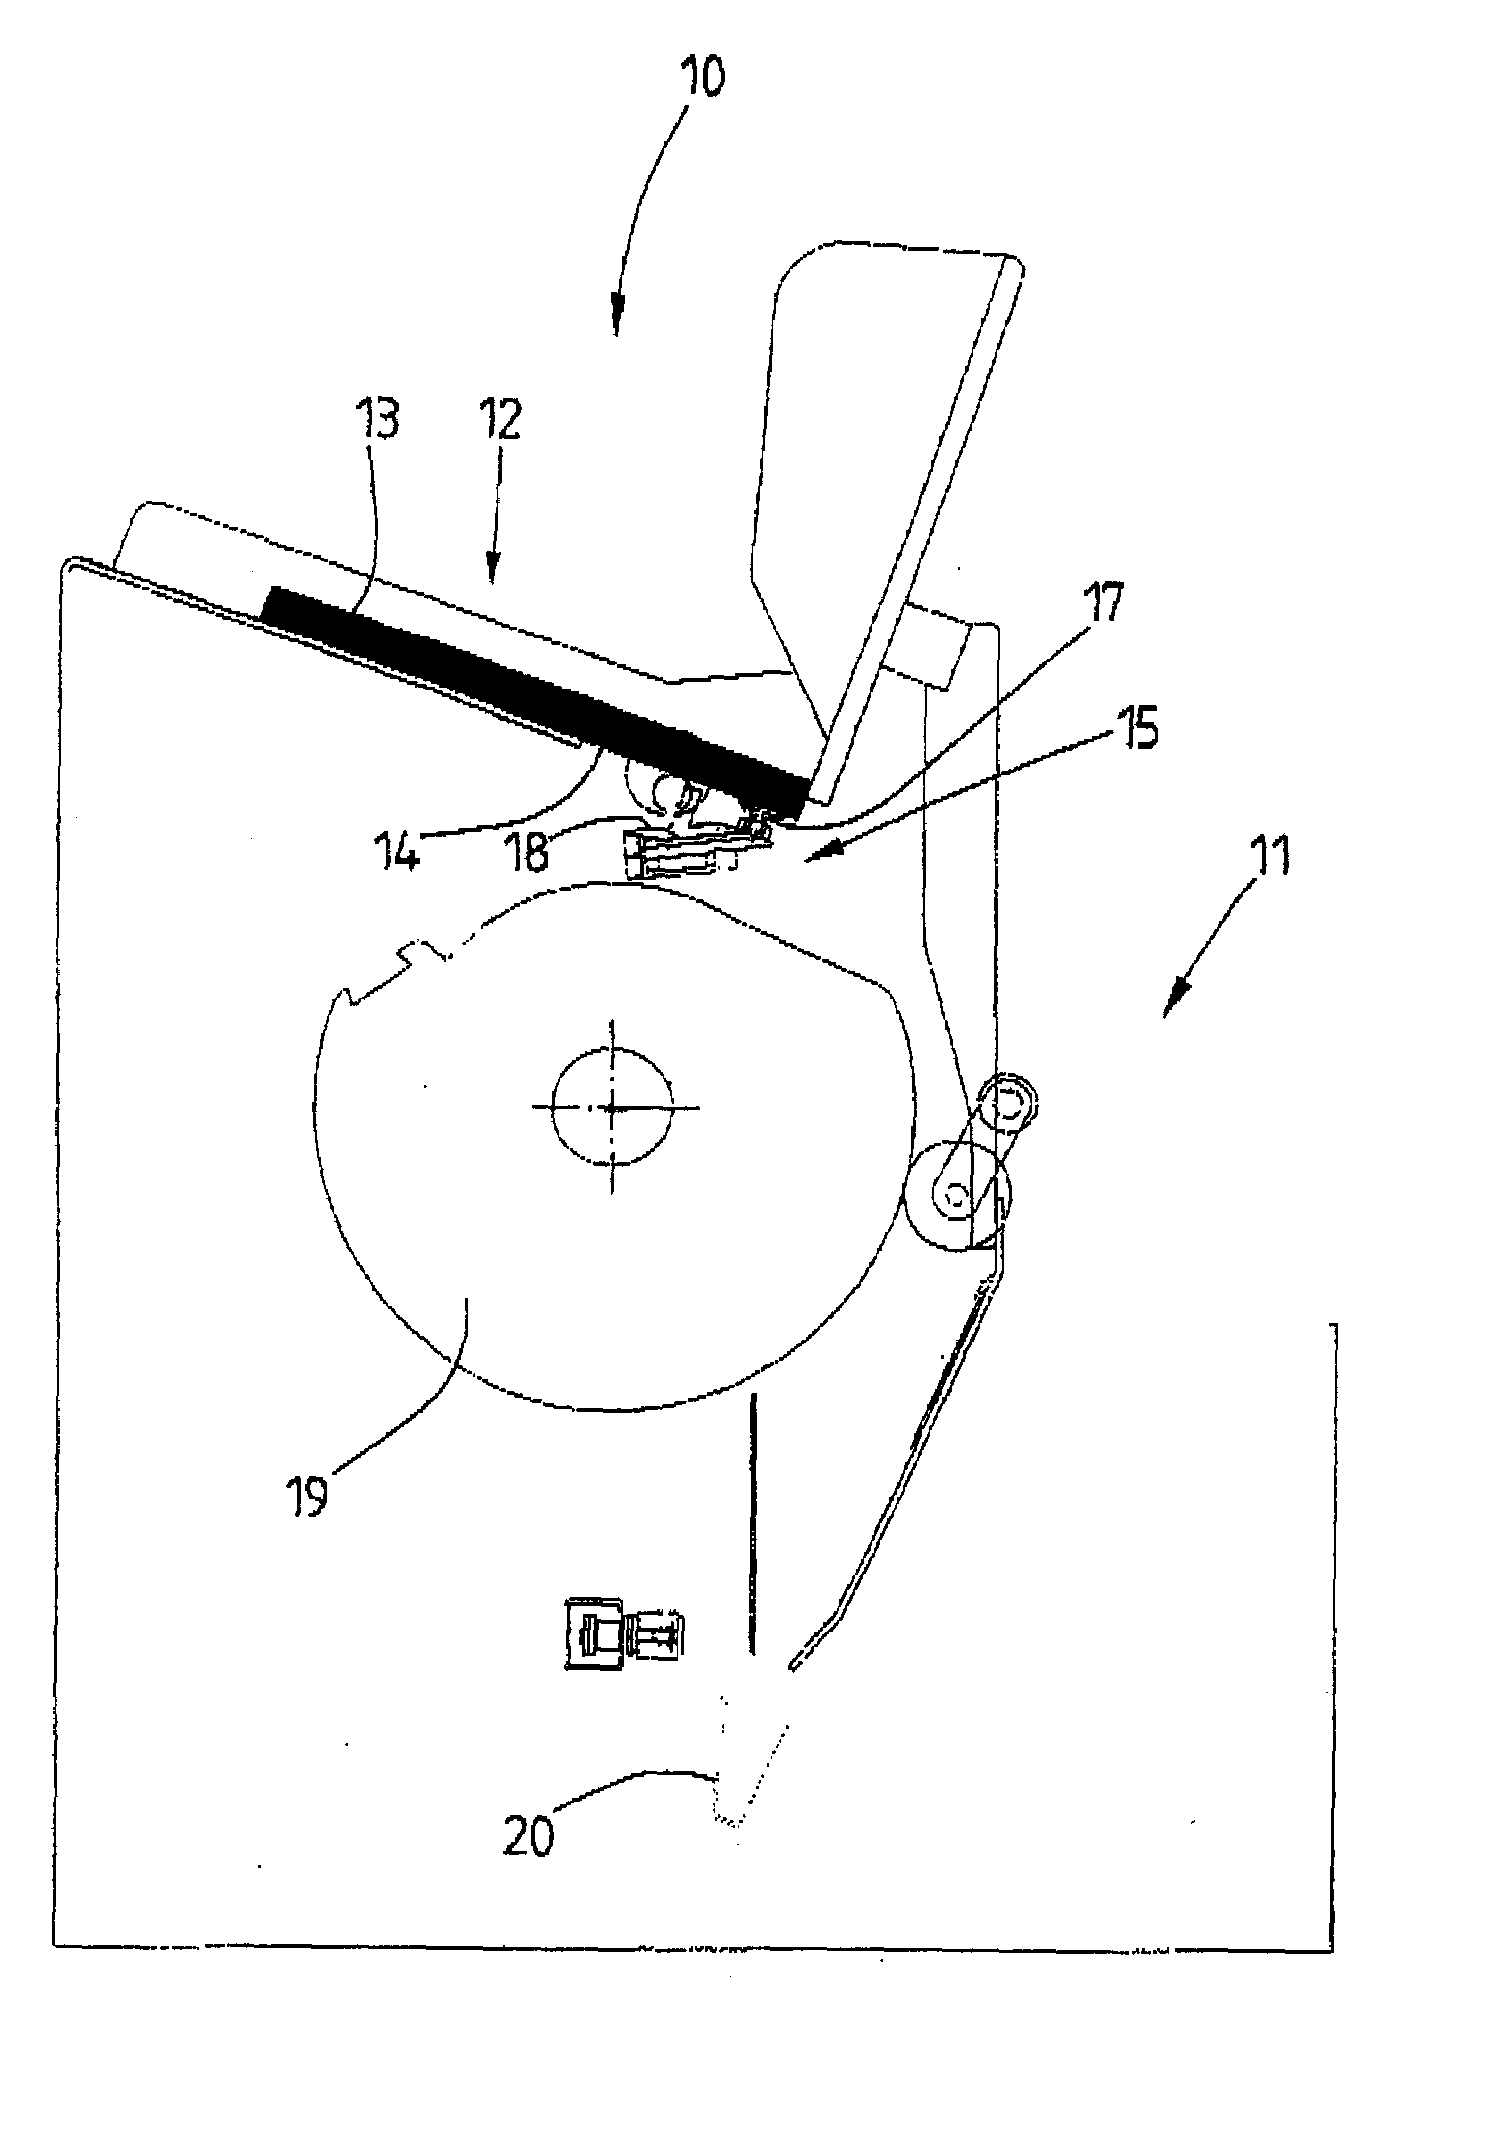 Apparatus for tilting away a part of a signature to be separated from a rack